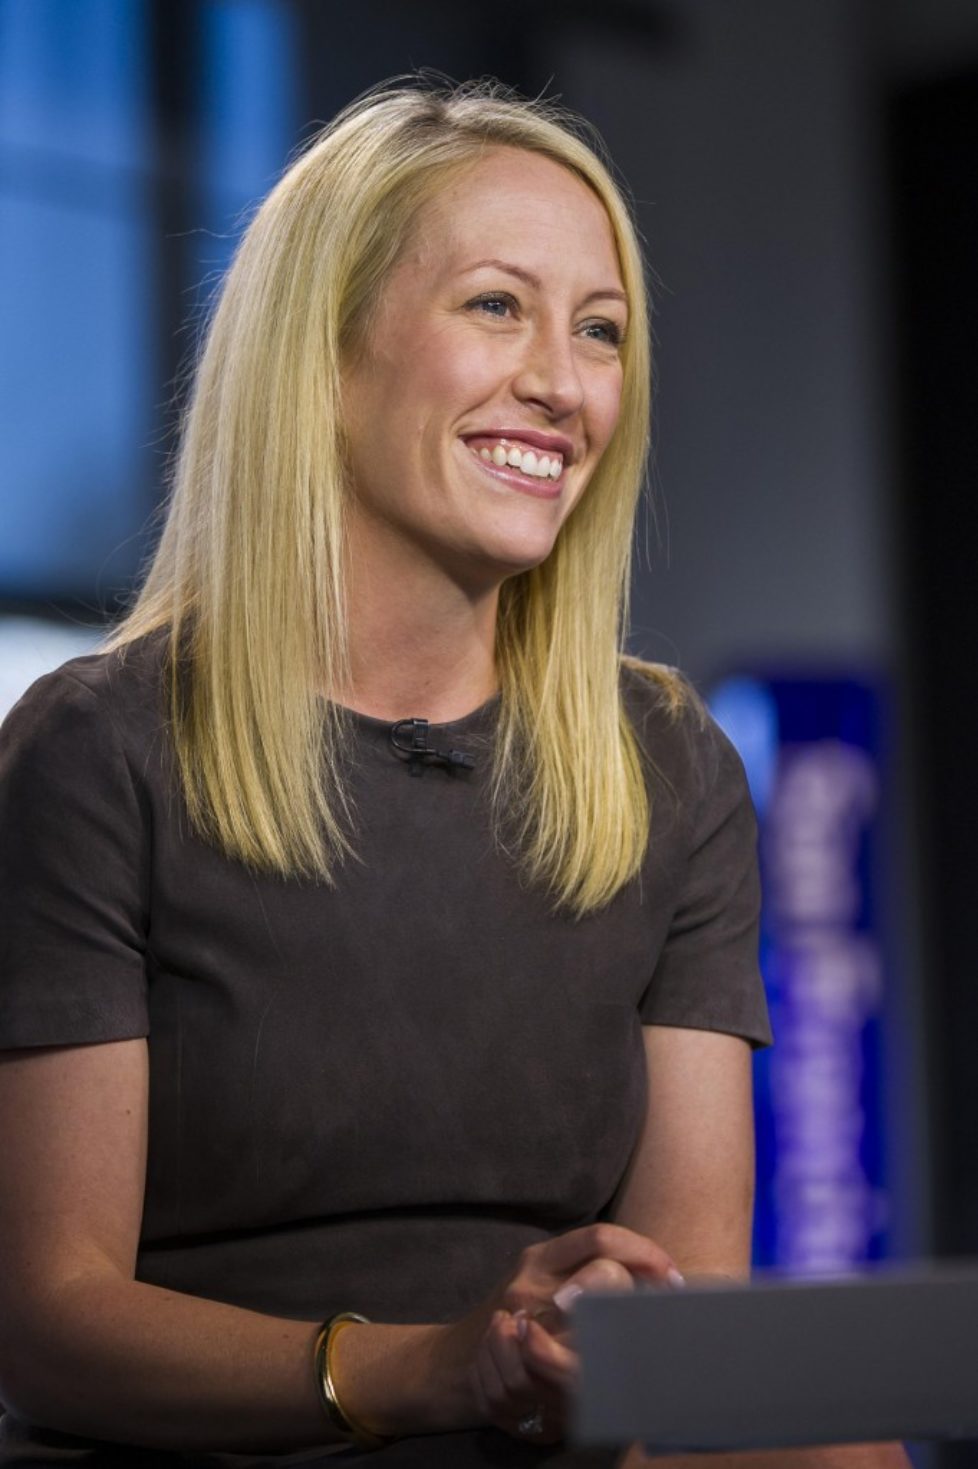 Julia Hartz, president and co-founder of Eventbrite Inc., smiles during a Bloomberg West television interview in San Francisco, California, U.S., on Thursday, Sept. 26, 2013. Eventbrite Inc. provides online event planning services. Photographer: David Paul Morris/Bloomberg via Getty Images